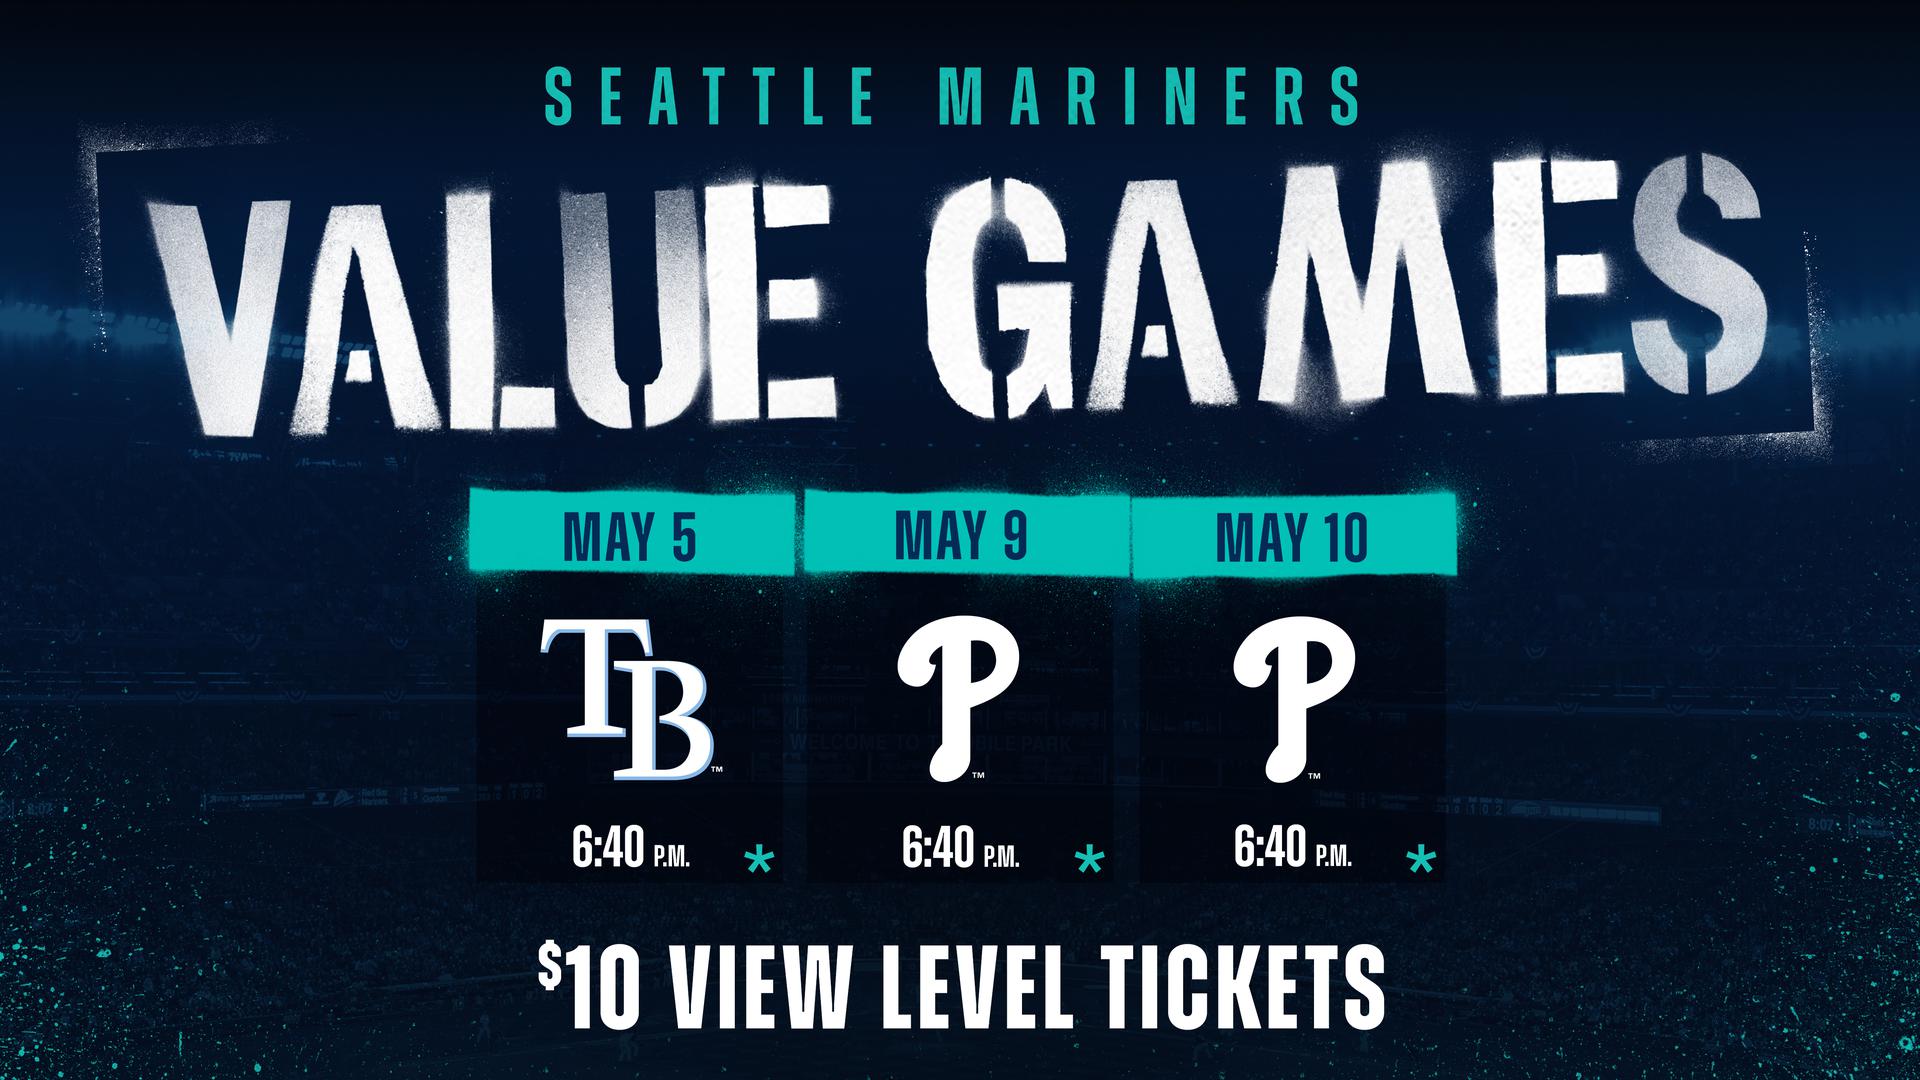 Mariners value games